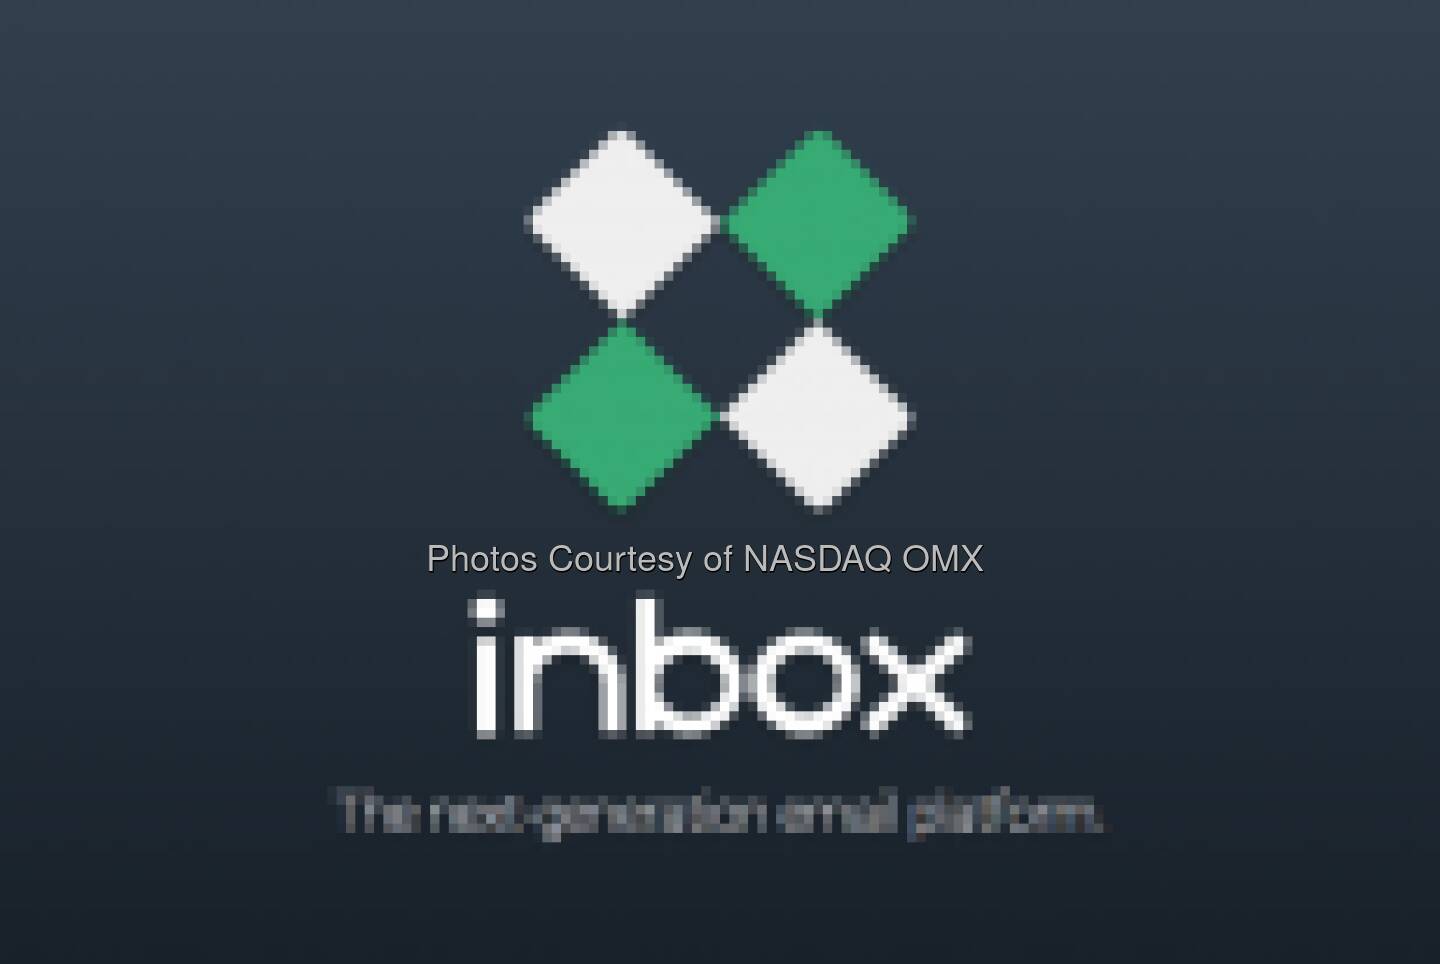 MIT And Dropbox Alums Launch Inbox, A Next-Generation Email Platform | TechCrunch http://bit.ly/1rY9WJM Founded by Dropbox and MIT alums, a new startup called Inbox is launching out of stealth today, hoping to power the next generation of email applications... Source: http://facebook.com/NASDAQ